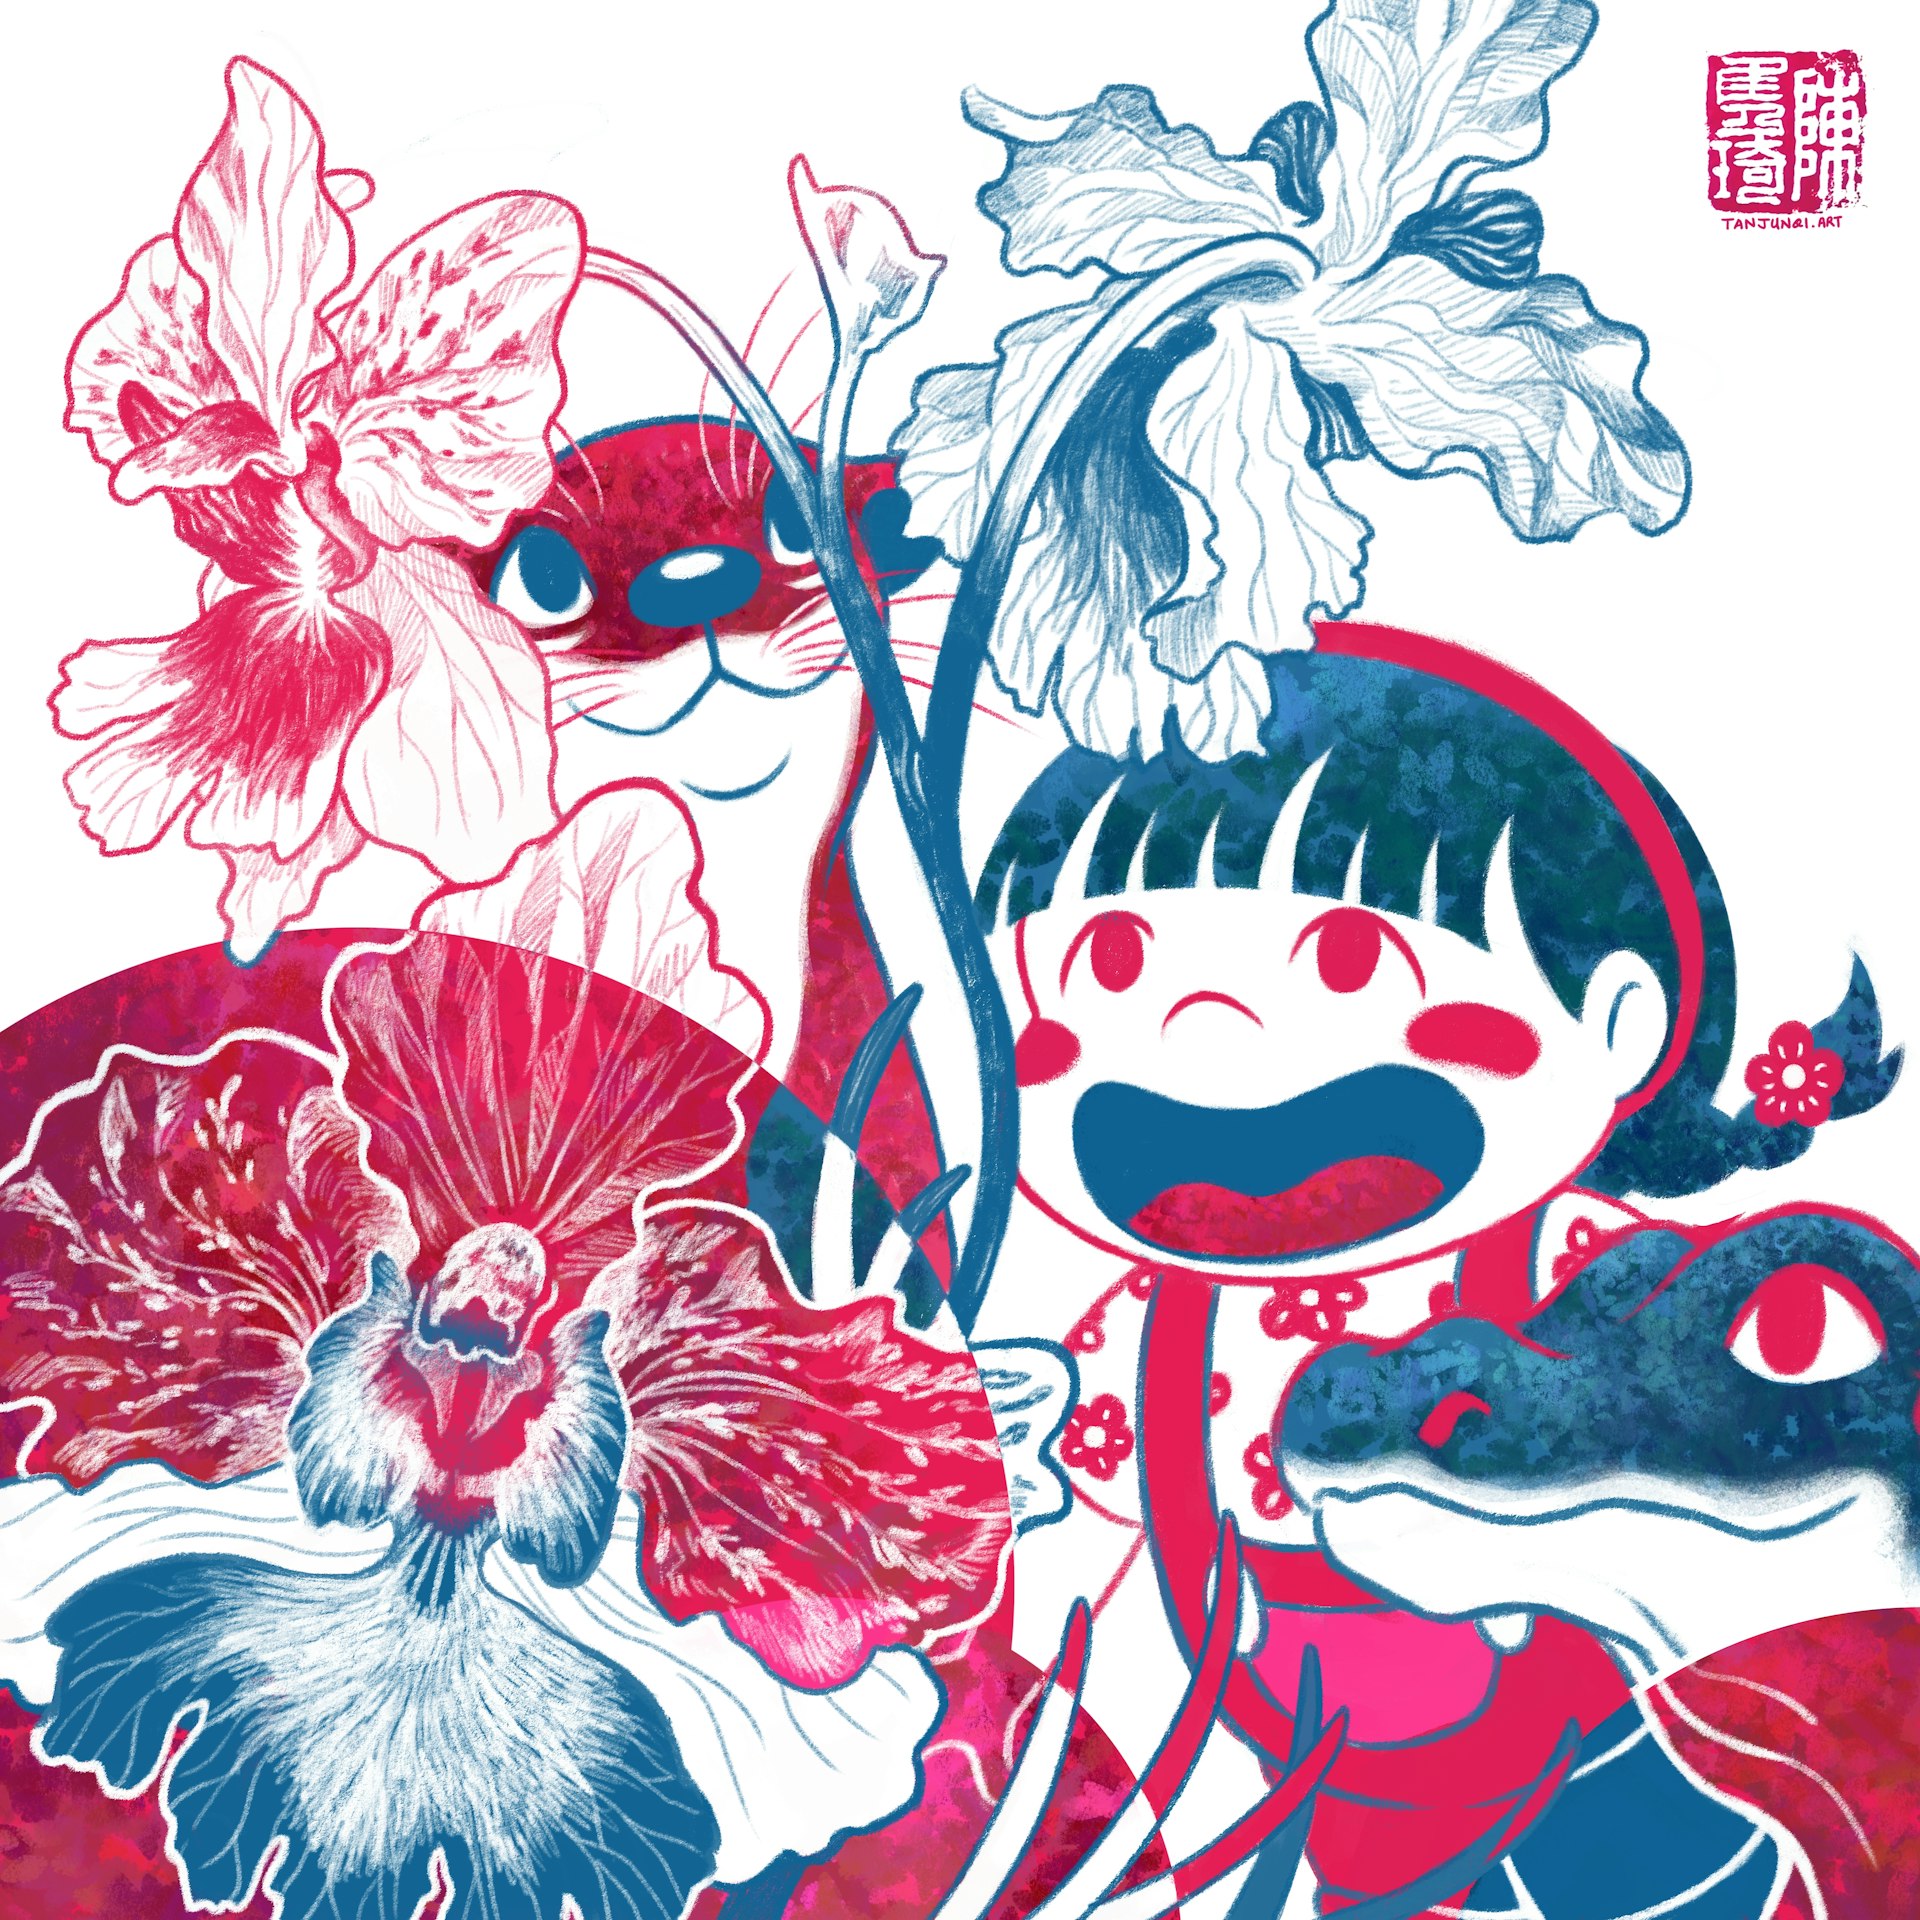 Digital painting in a fuschia and dark blue theme, showing Shan Shan, Mr. Otter and Ms. Water Monitor admiring a cluster of blooming orchids. The style is slightly graphic, playing with outlines and positive/negative space.